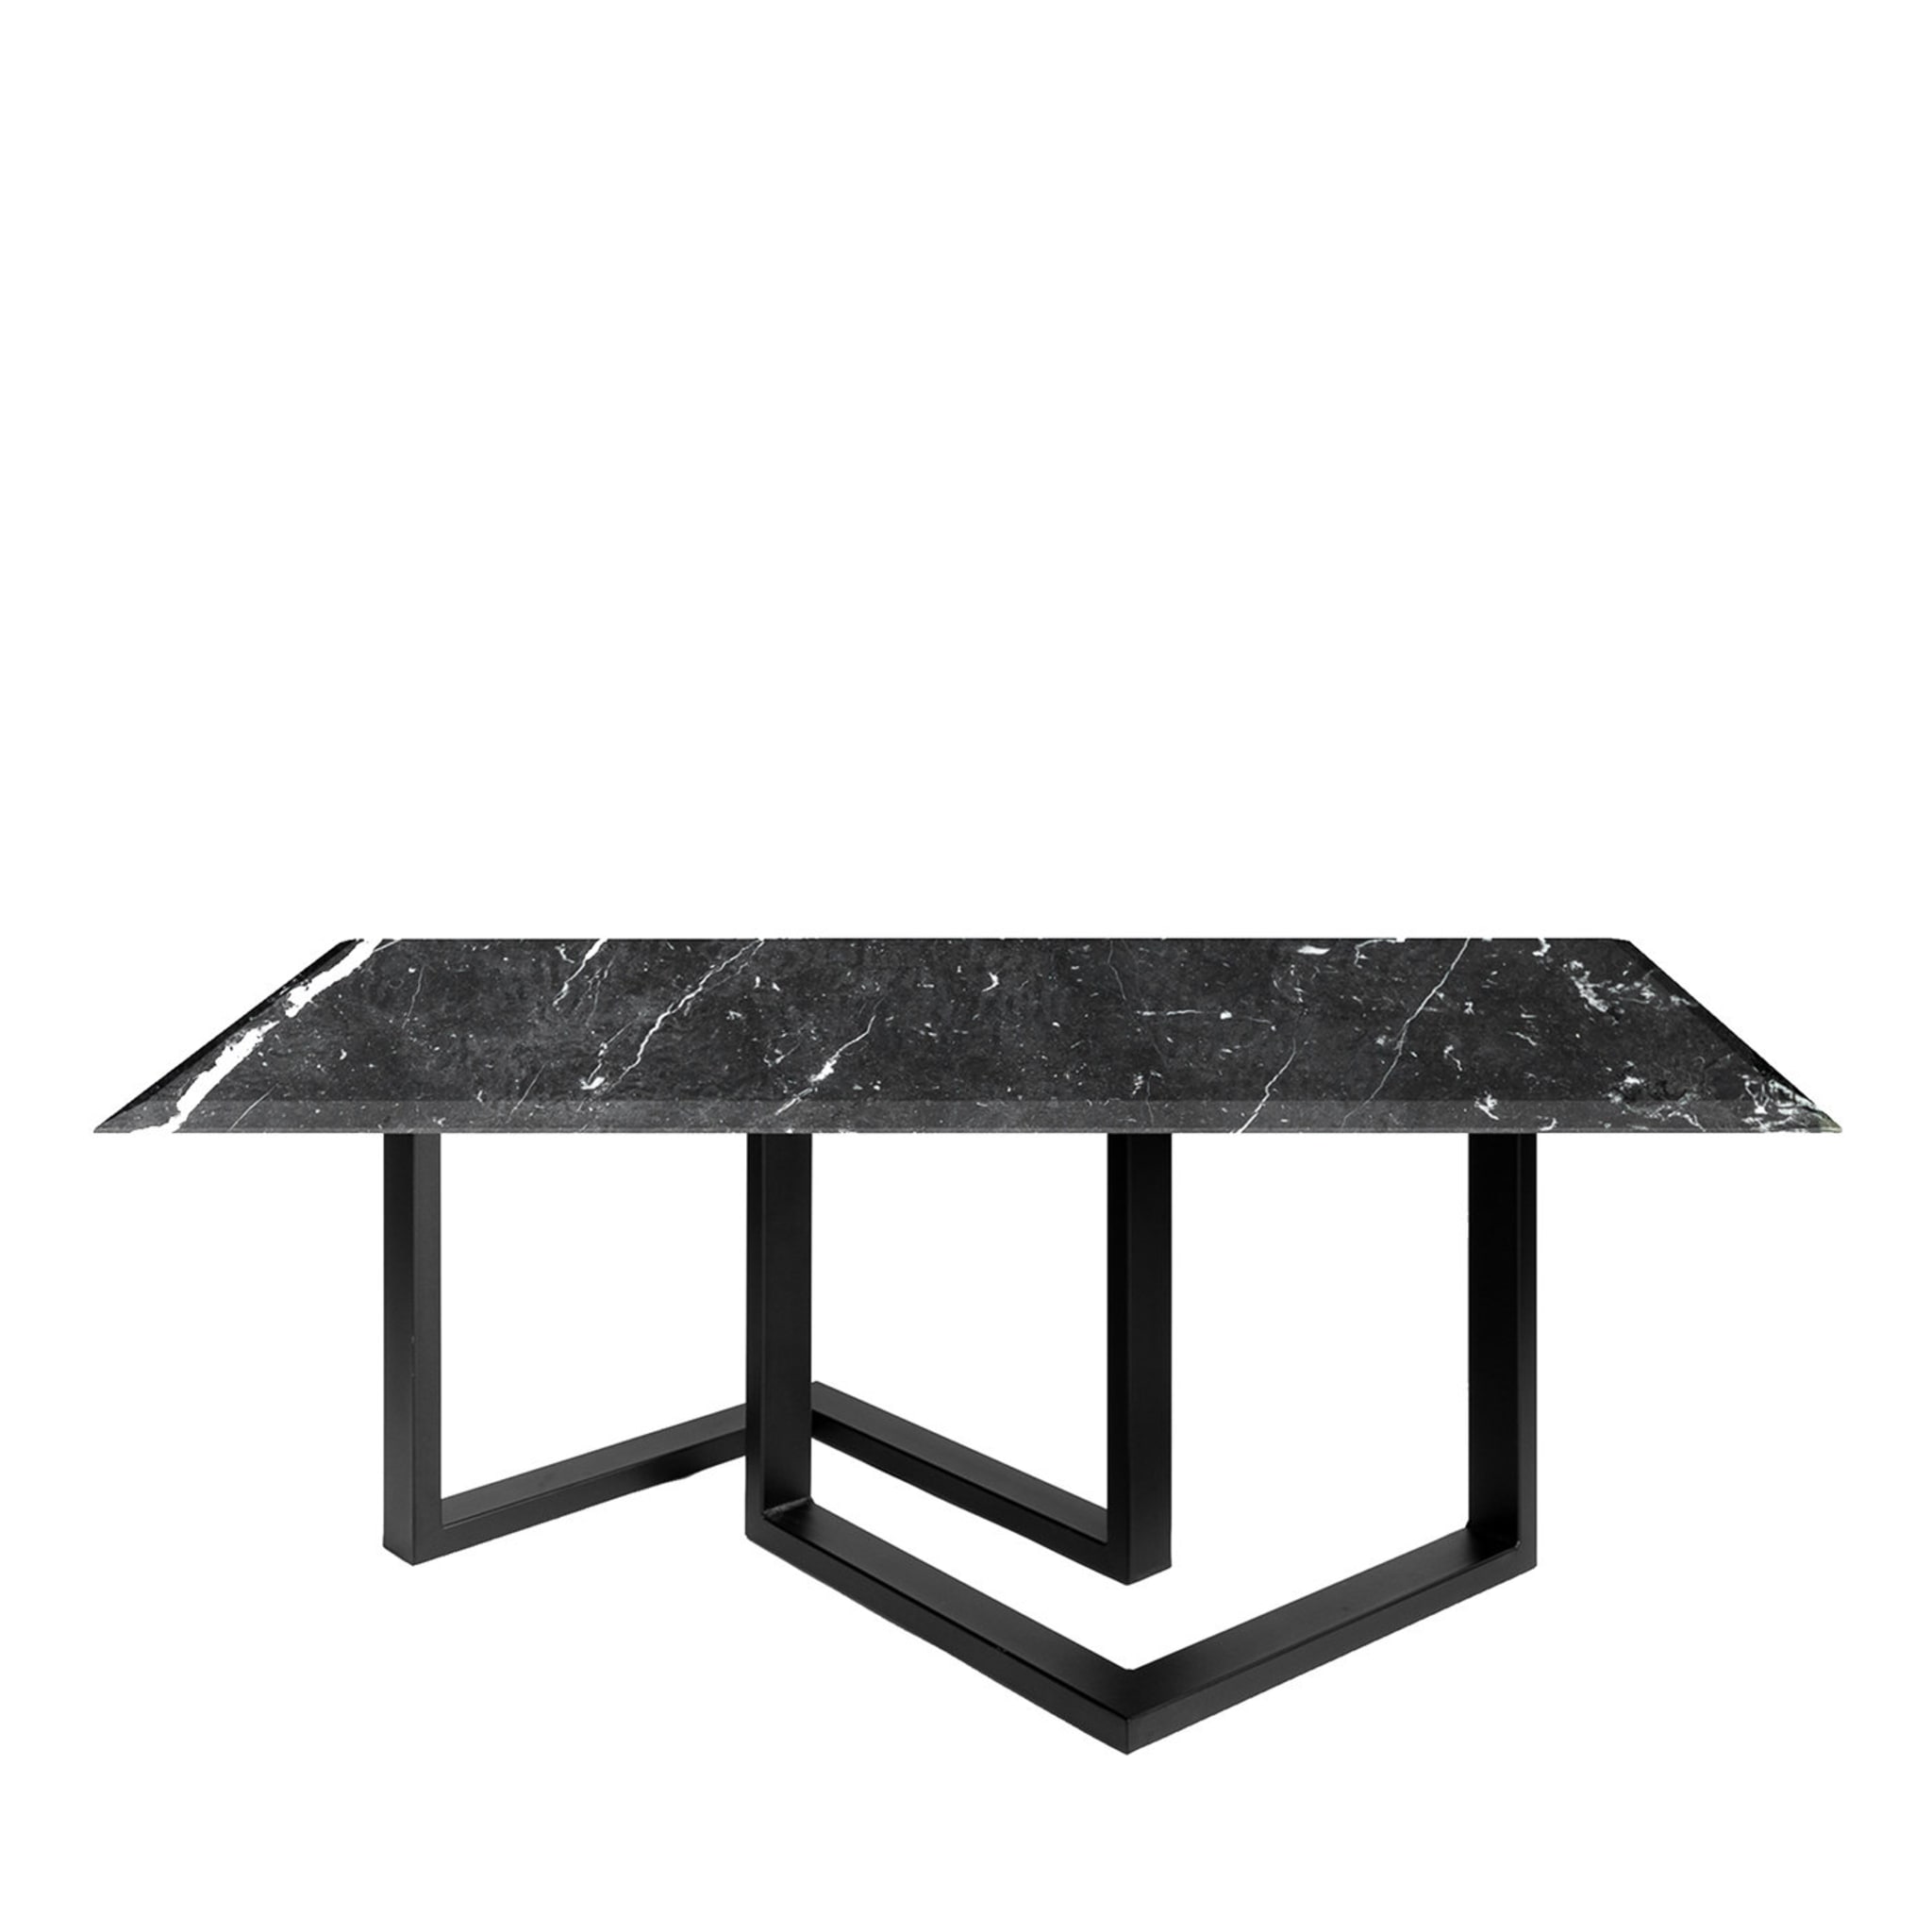 Zannone Black Marquina Dining Table - Main view